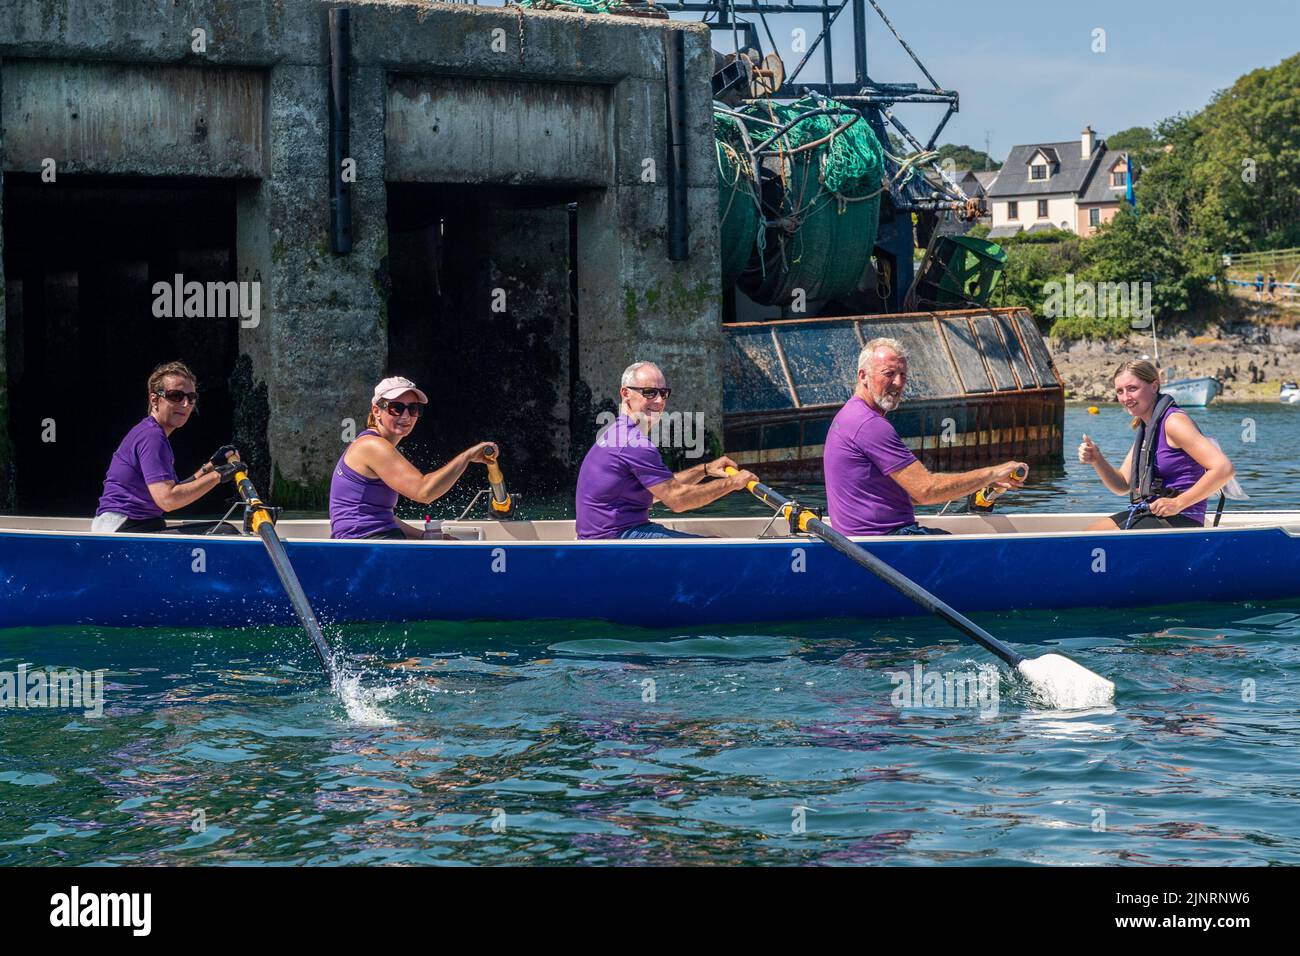 Schull, West Cork, Ireland. 13th Aug, 2022. The 2022 Irish Coastal Rowing Championships is taking place this weekend in Schull, West Cork. A total of 290 crews from different clubs are taking part in the event which finishes Sunday evening. Rosscarbery Rowing Club mixed crew warms down after a race. Credit: AG News/Alamy Live News Stock Photo